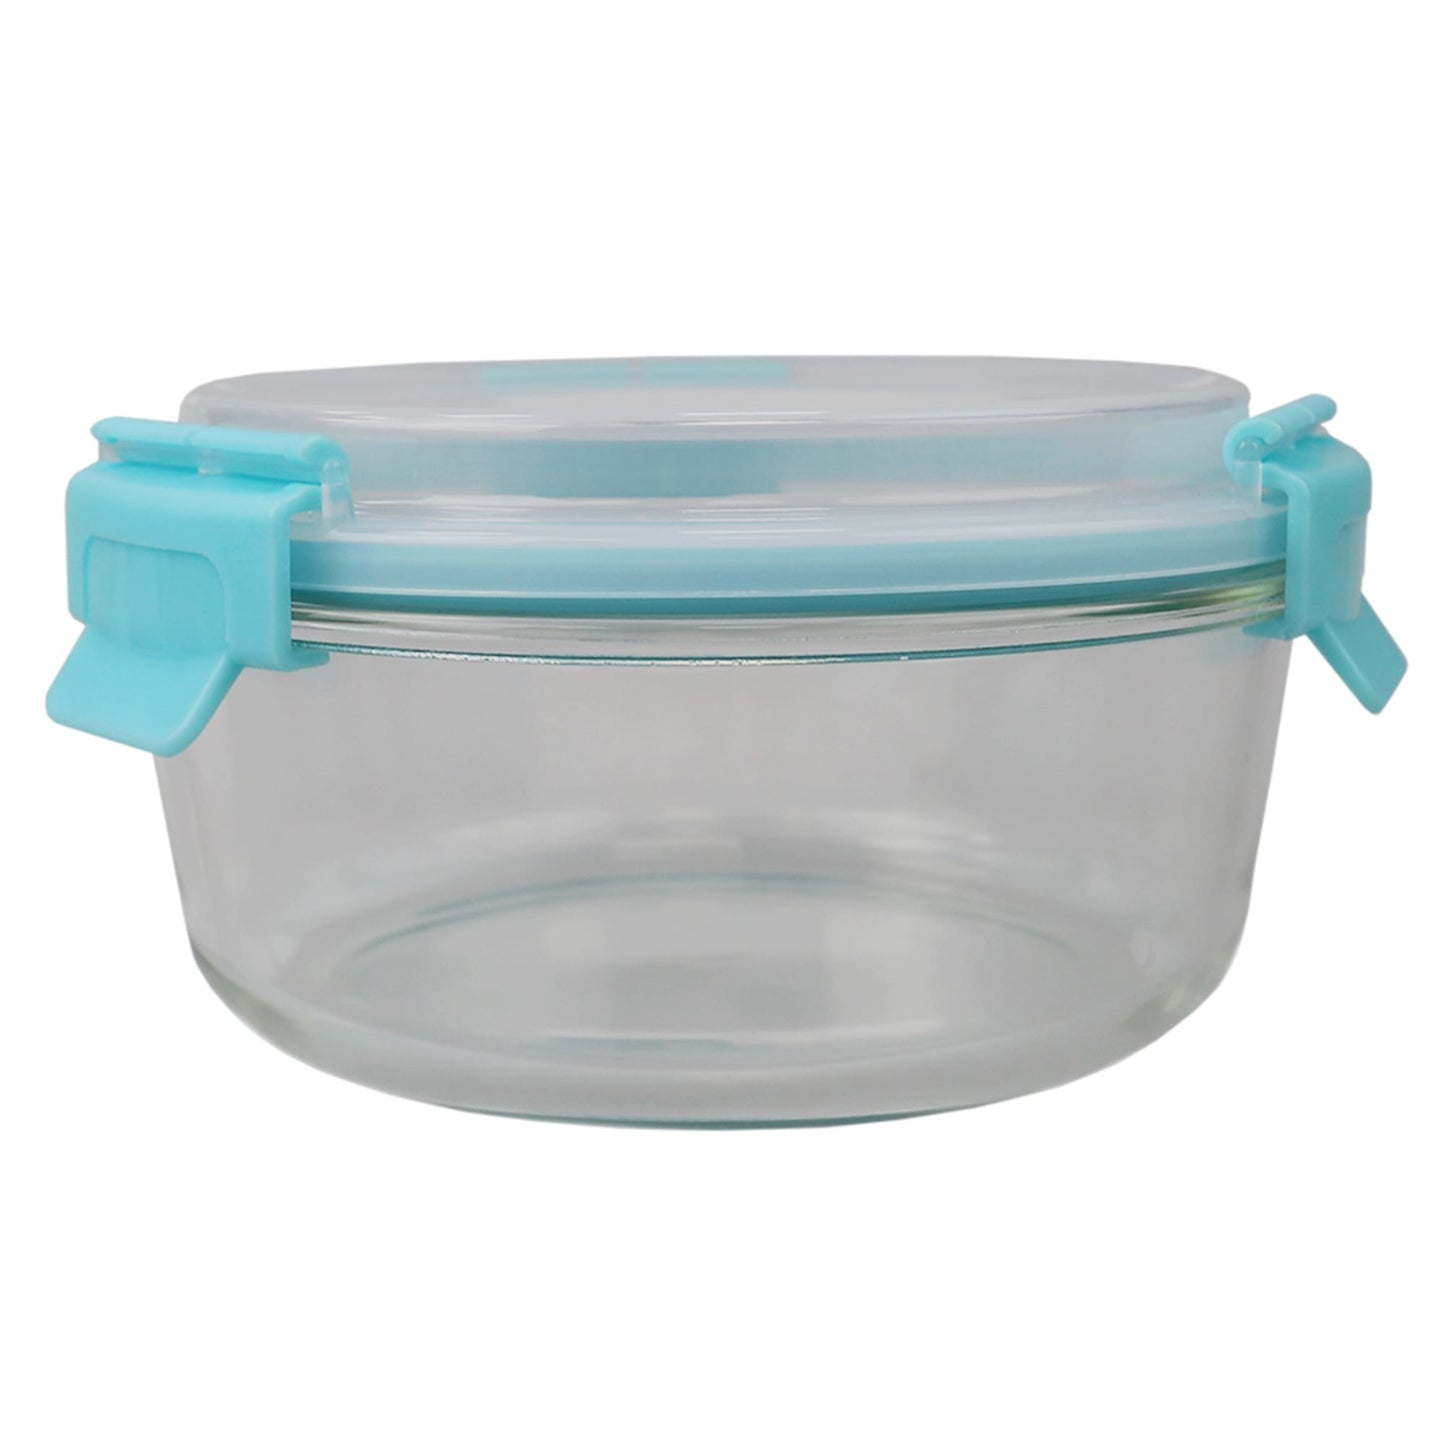 Leak Proof 32 oz. Round Borosilicate Glass Food Storage Container with Air-tight Plastic Lid, Turquoise